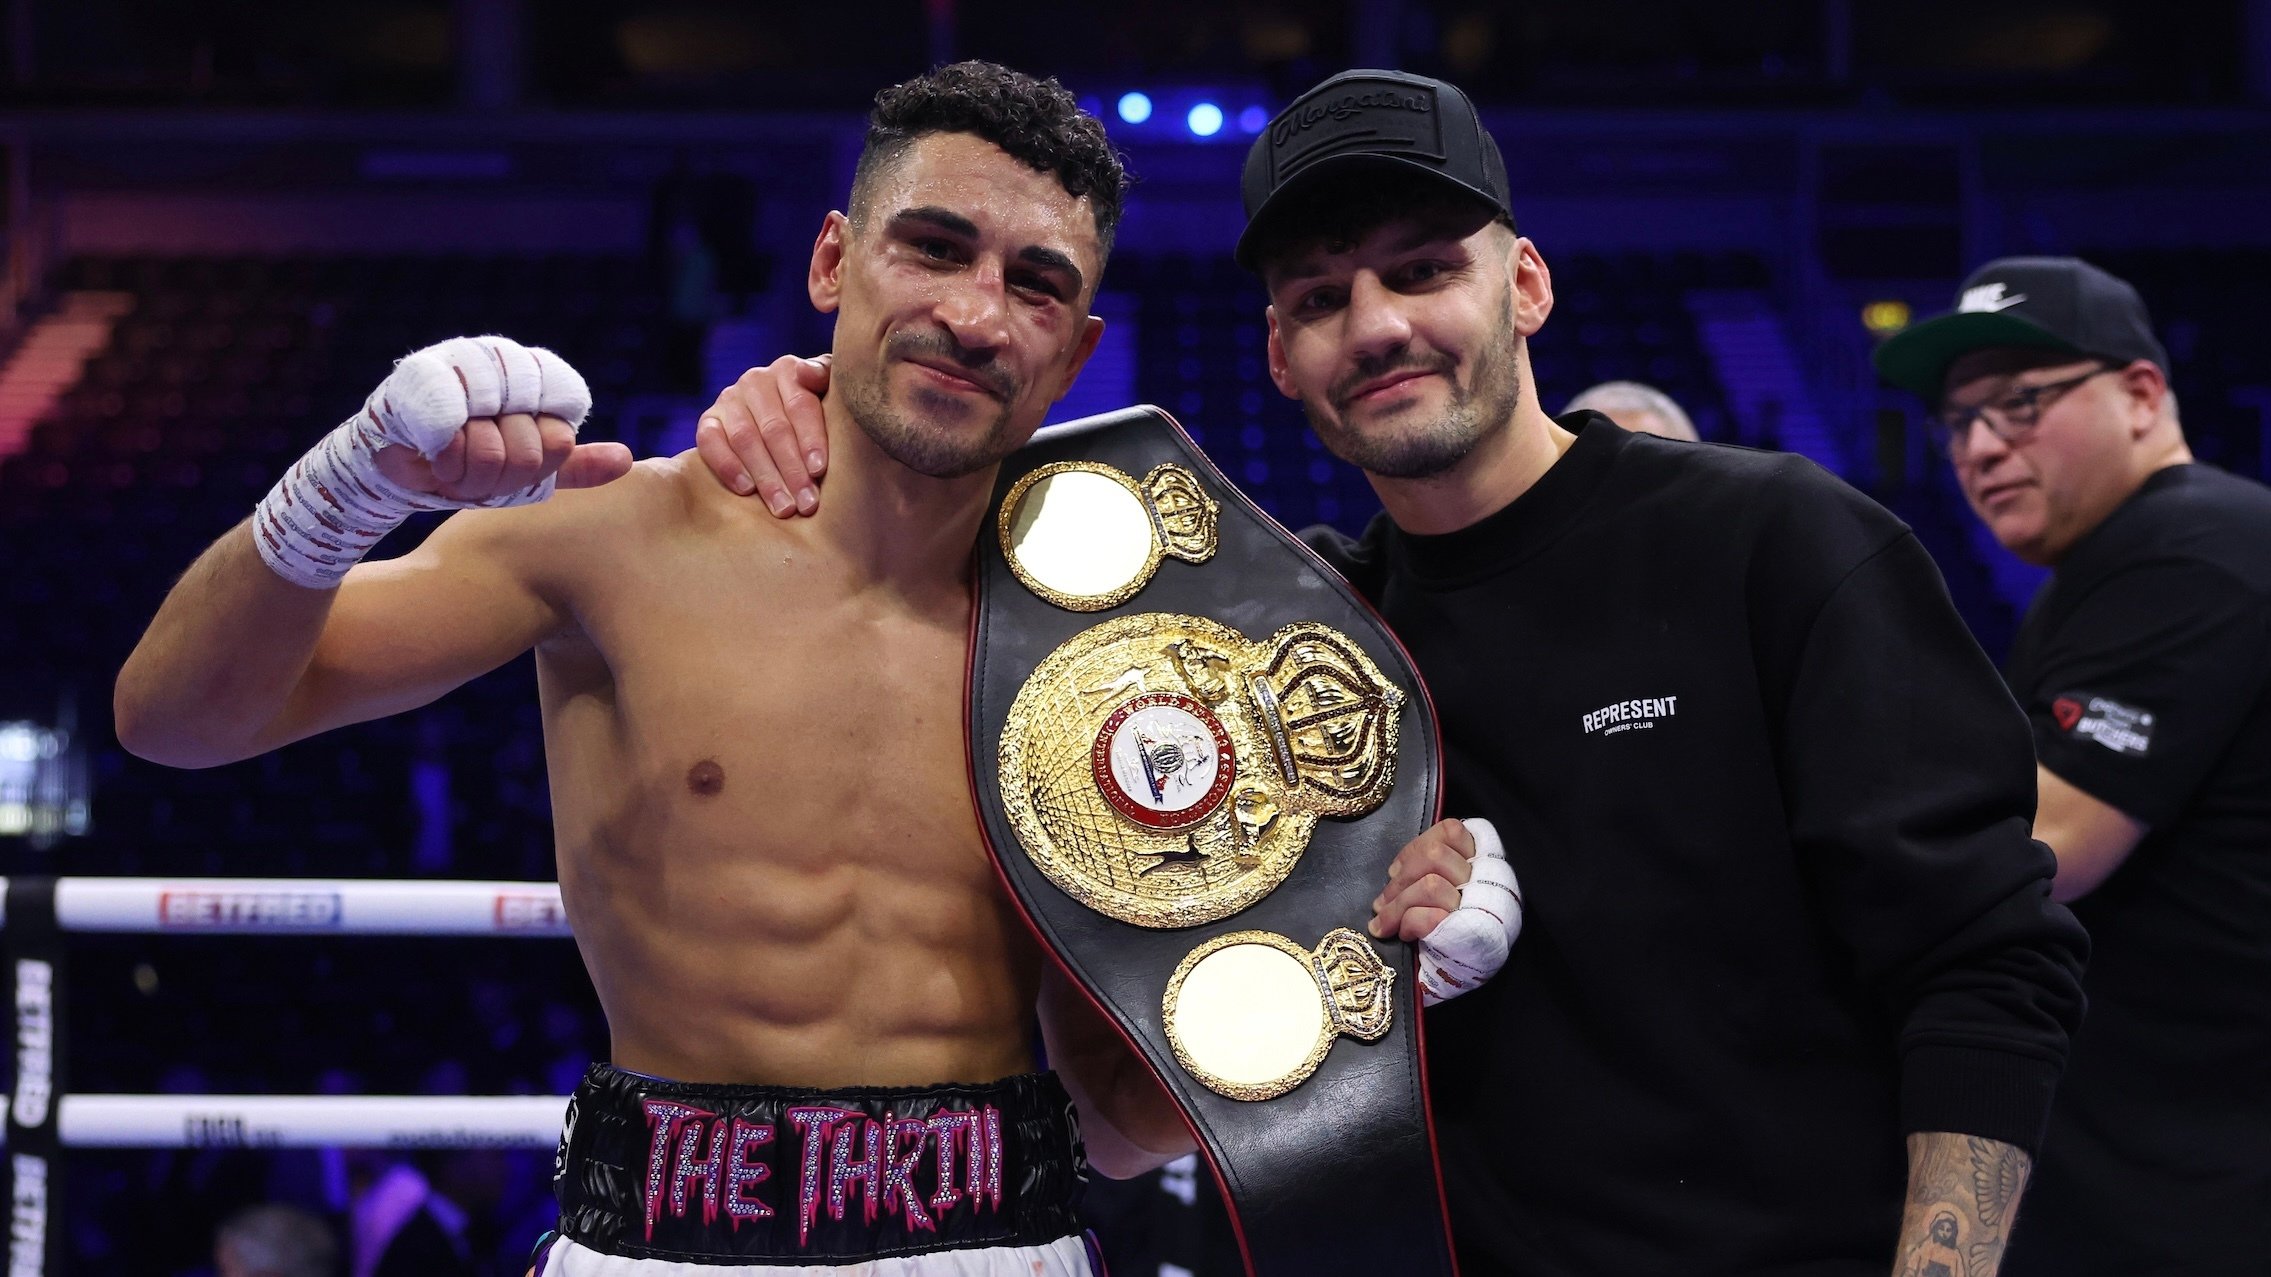 Jordan Gill looks to the future after inspired victory against Michael Conlan: "I think Joe Cordina and me would be a great fight"